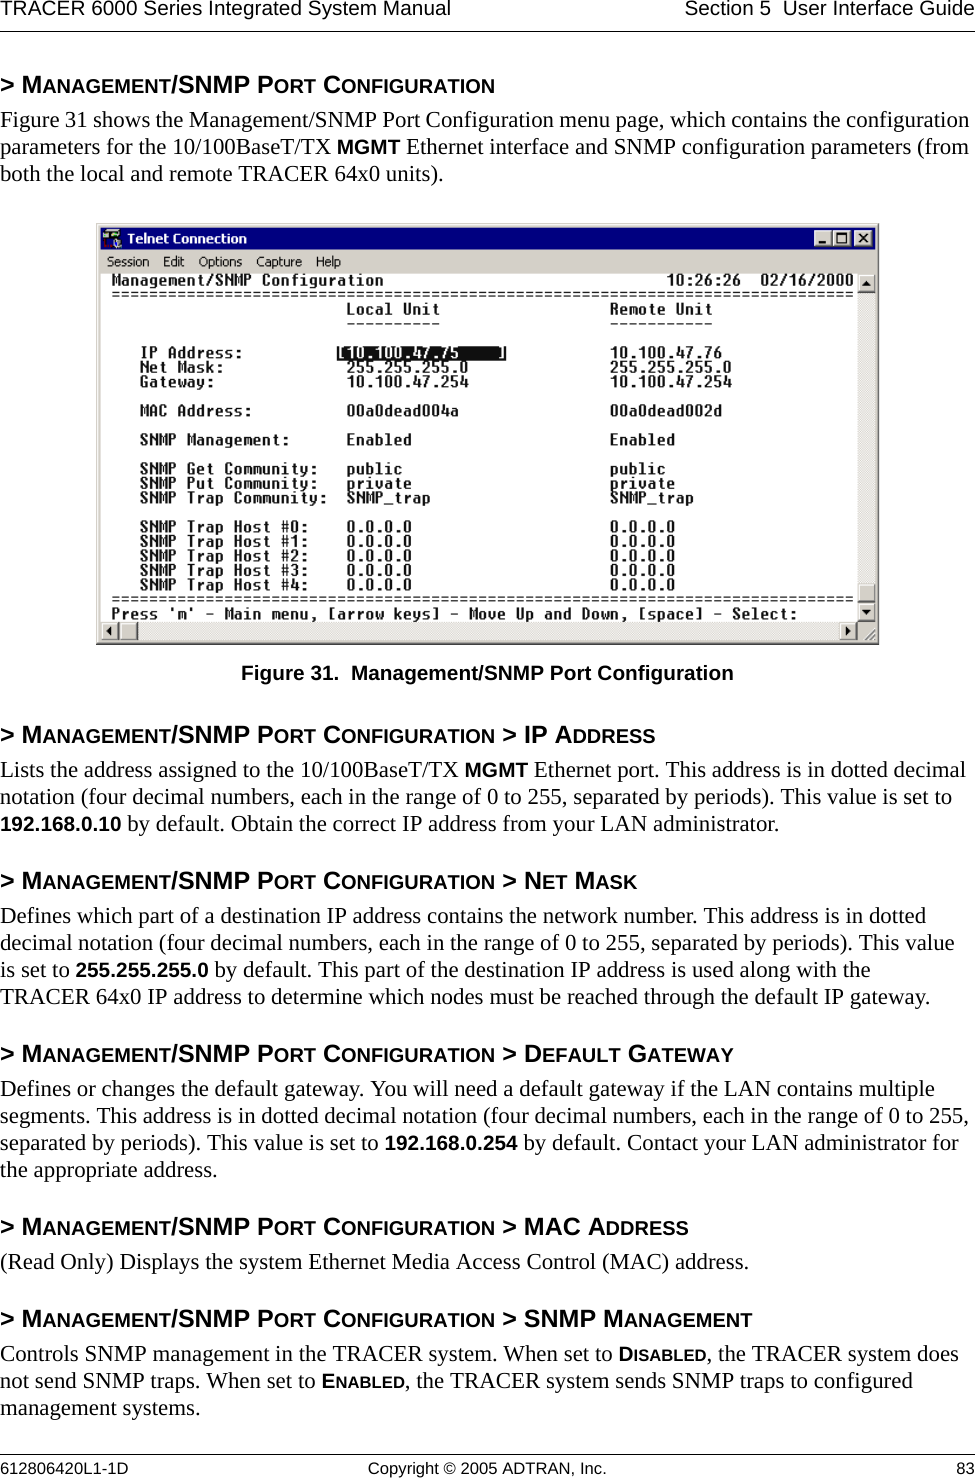 TRACER 6000 Series Integrated System Manual Section 5  User Interface Guide612806420L1-1D Copyright © 2005 ADTRAN, Inc. 83&gt; MANAGEMENT/SNMP PORT CONFIGURATIONFigure 31 shows the Management/SNMP Port Configuration menu page, which contains the configuration parameters for the 10/100BaseT/TX MGMT Ethernet interface and SNMP configuration parameters (from both the local and remote TRACER 64x0 units). Figure 31.  Management/SNMP Port Configuration&gt; MANAGEMENT/SNMP PORT CONFIGURATION &gt; IP ADDRESSLists the address assigned to the 10/100BaseT/TX MGMT Ethernet port. This address is in dotted decimal notation (four decimal numbers, each in the range of 0 to 255, separated by periods). This value is set to 192.168.0.10 by default. Obtain the correct IP address from your LAN administrator.&gt; MANAGEMENT/SNMP PORT CONFIGURATION &gt; NET MASKDefines which part of a destination IP address contains the network number. This address is in dotted decimal notation (four decimal numbers, each in the range of 0 to 255, separated by periods). This value is set to 255.255.255.0 by default. This part of the destination IP address is used along with the TRACER 64x0 IP address to determine which nodes must be reached through the default IP gateway.&gt; MANAGEMENT/SNMP PORT CONFIGURATION &gt; DEFAULT GATEWAYDefines or changes the default gateway. You will need a default gateway if the LAN contains multiple segments. This address is in dotted decimal notation (four decimal numbers, each in the range of 0 to 255, separated by periods). This value is set to 192.168.0.254 by default. Contact your LAN administrator for the appropriate address.&gt; MANAGEMENT/SNMP PORT CONFIGURATION &gt; MAC ADDRESS(Read Only) Displays the system Ethernet Media Access Control (MAC) address.&gt; MANAGEMENT/SNMP PORT CONFIGURATION &gt; SNMP MANAGEMENTControls SNMP management in the TRACER system. When set to DISABLED, the TRACER system does not send SNMP traps. When set to ENABLED, the TRACER system sends SNMP traps to configured management systems.